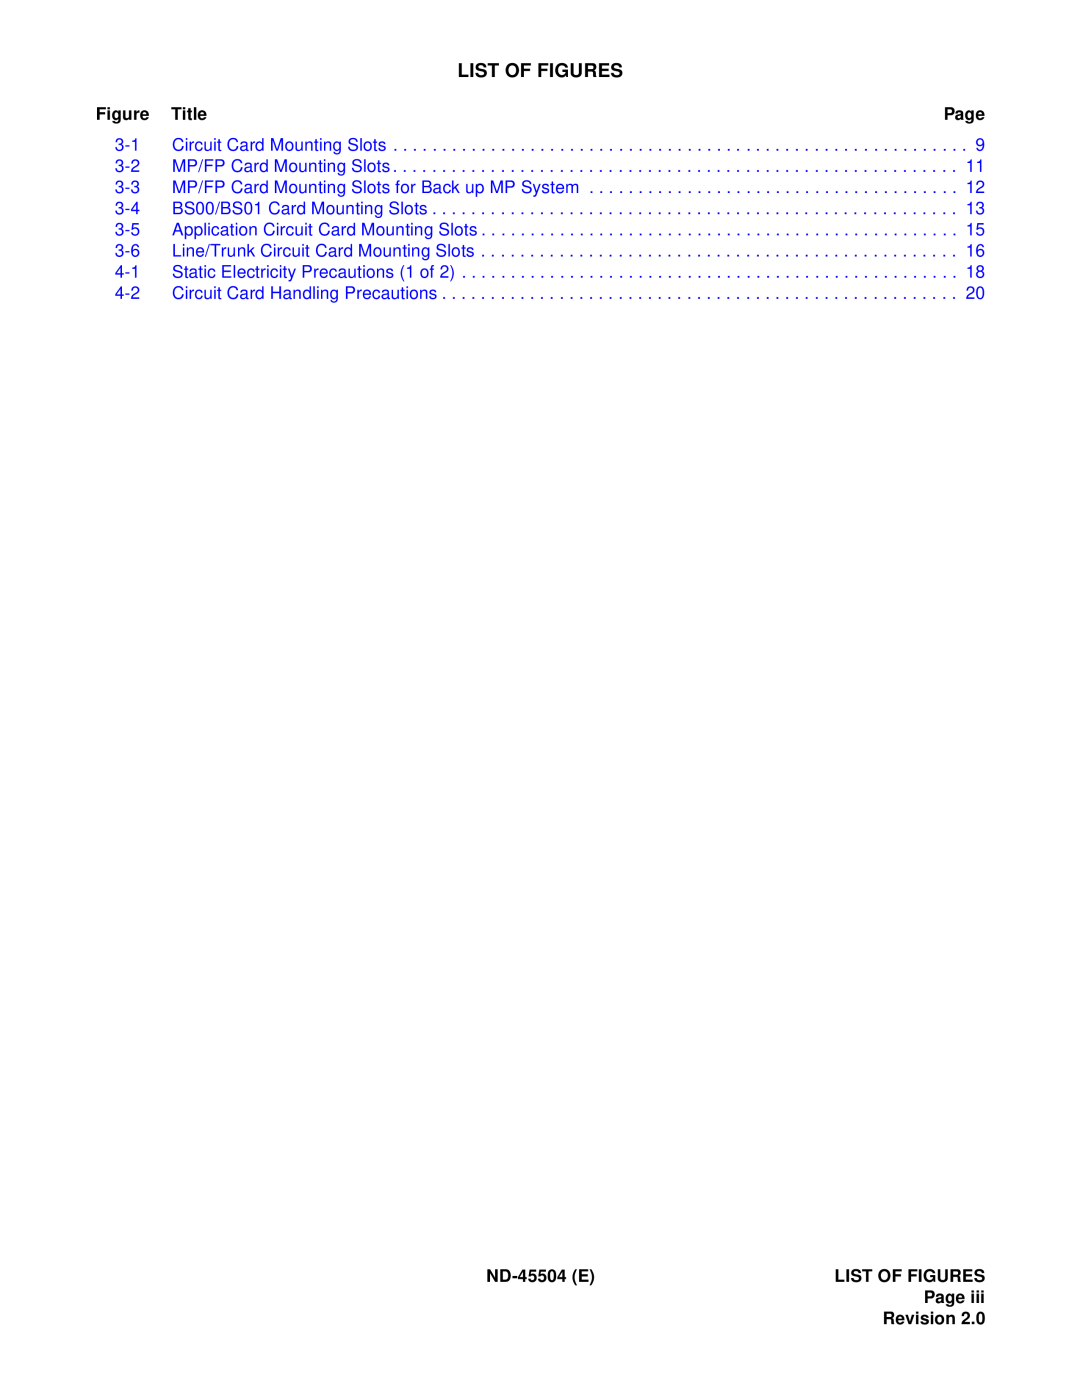 NEC 2000 IVS manual List Of Figures, Figure Title, ND-45504ELIST OF FIGURES Page Revision 